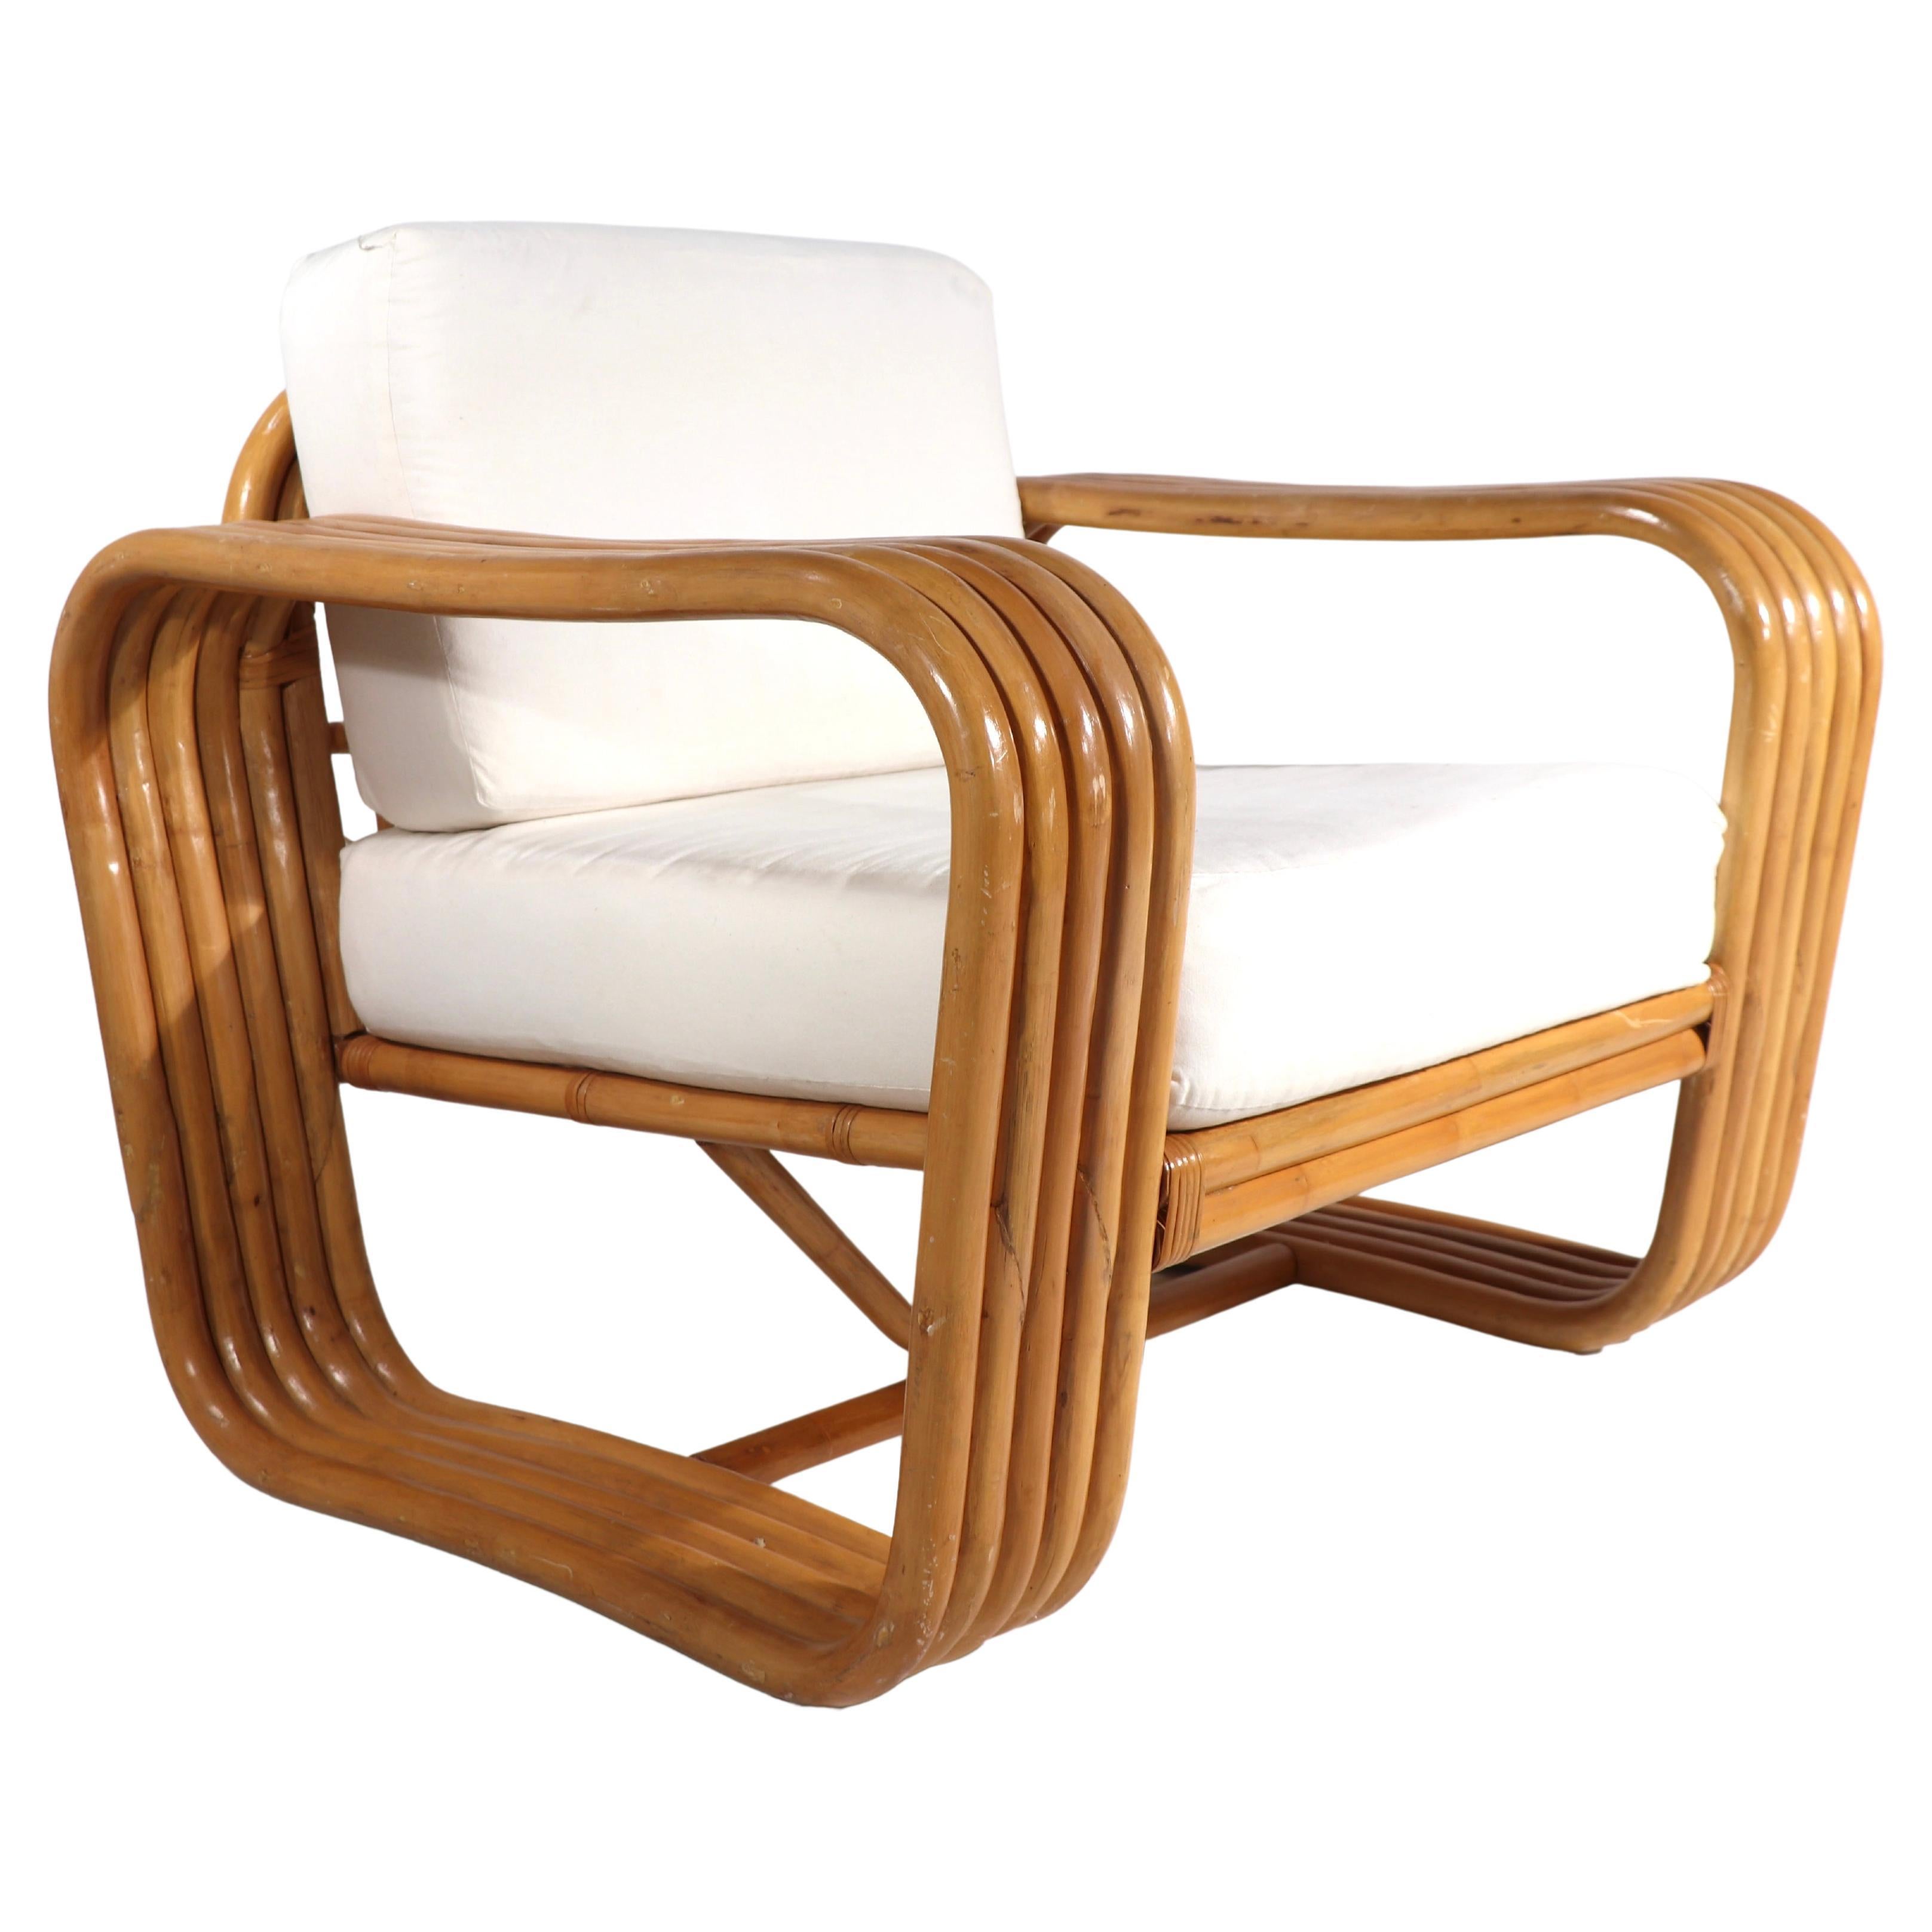 Stylish Mid Century bamboo lounge chair having 5 band thick - 7 inch W arms. The chair is in very good clean, original condition, showing only light cosmetic wear, normal and consistent with age. The cushions are in muslin, ready for your fabric.